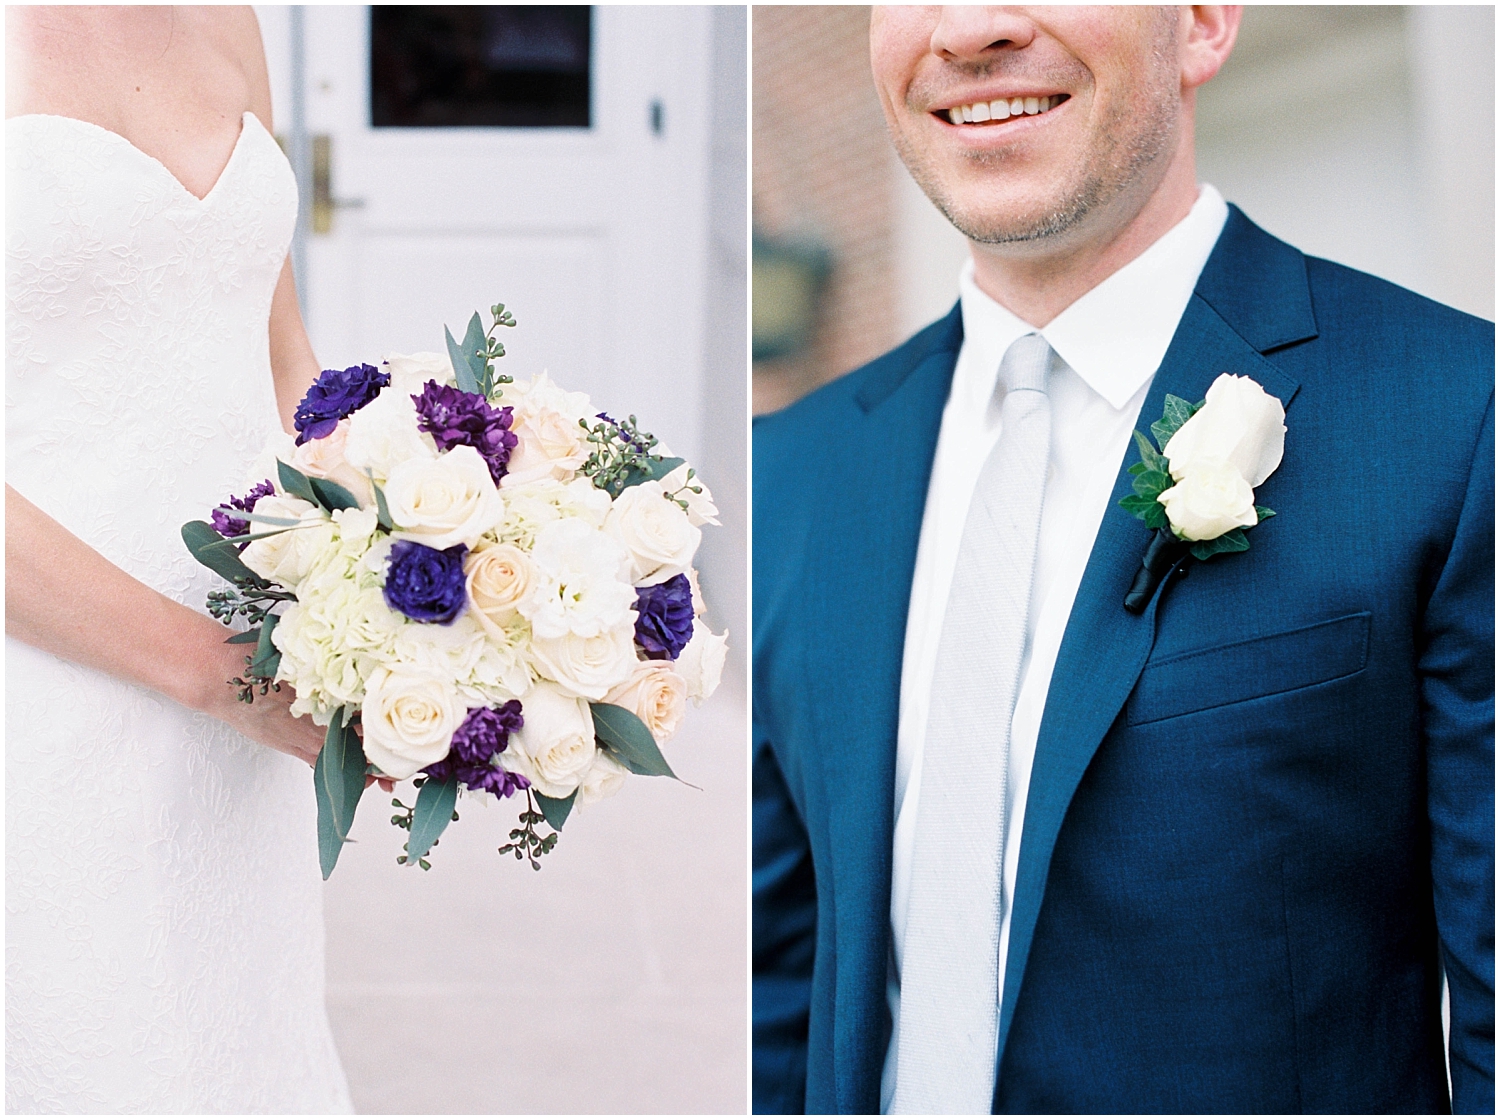  detail shot of the bride’s wedding bouquet and groom’s look 